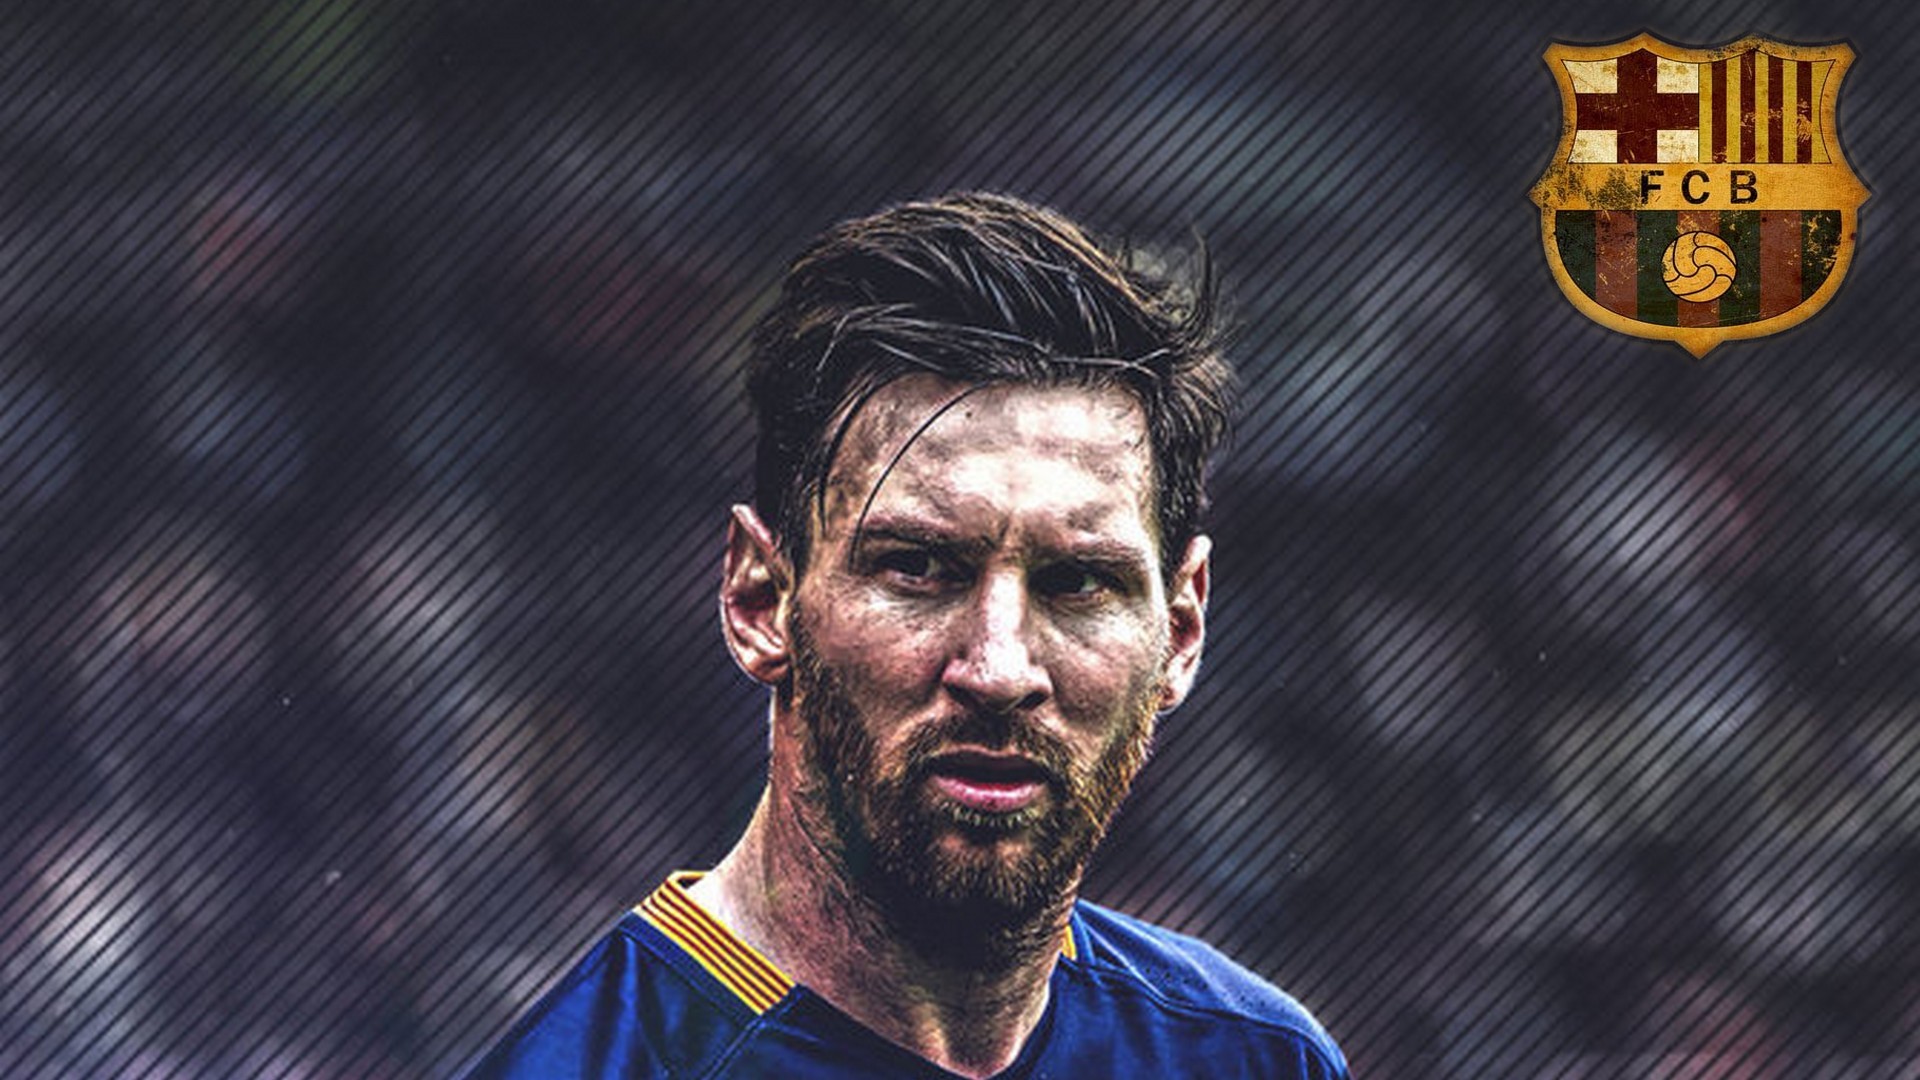 HD Leo Messi Backgrounds with resolution 1920x1080 pixel. You can make this wallpaper for your Mac or Windows Desktop Background, iPhone, Android or Tablet and another Smartphone device